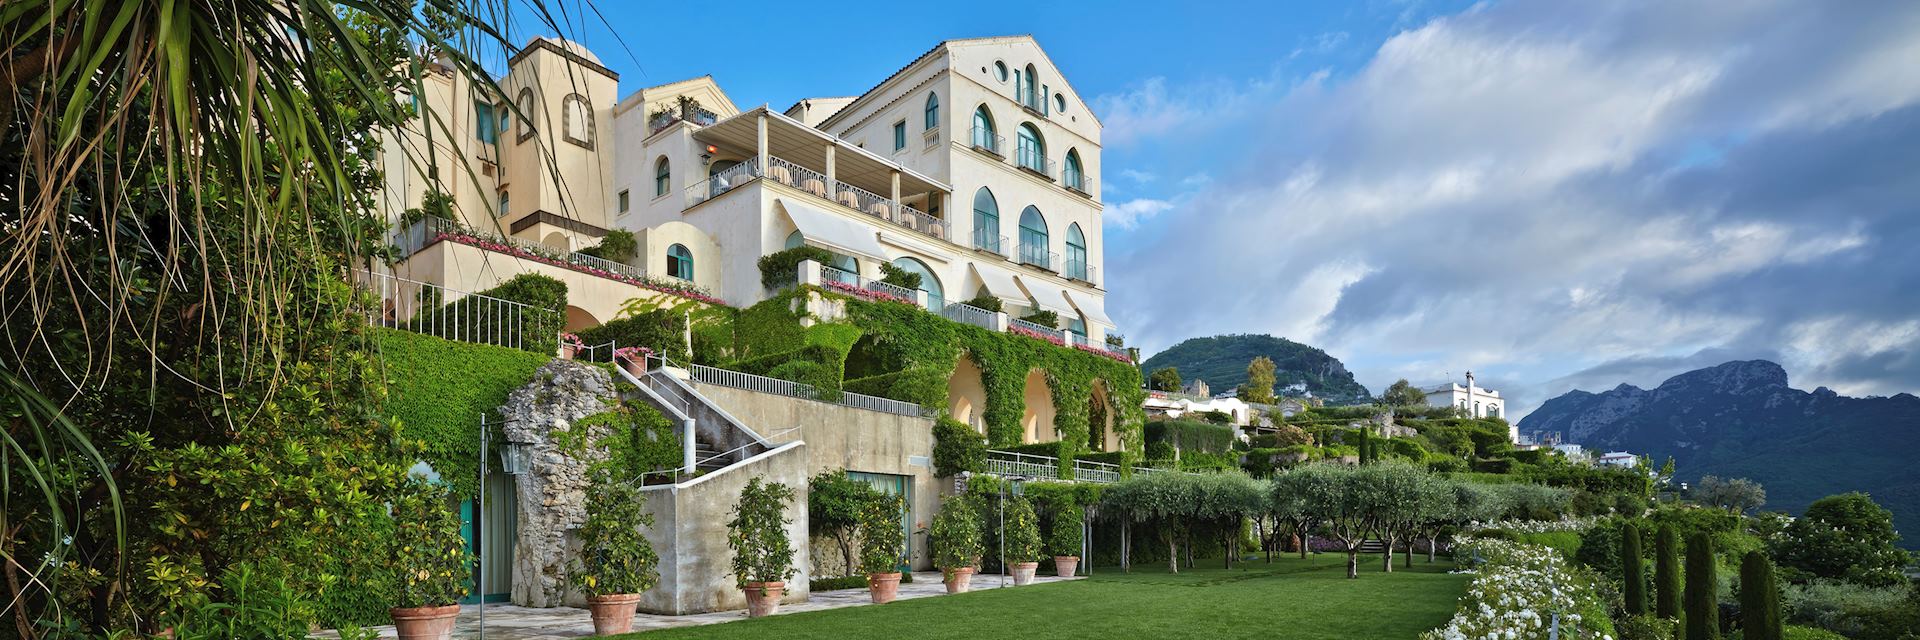 Review: Hotel Caruso, Italy